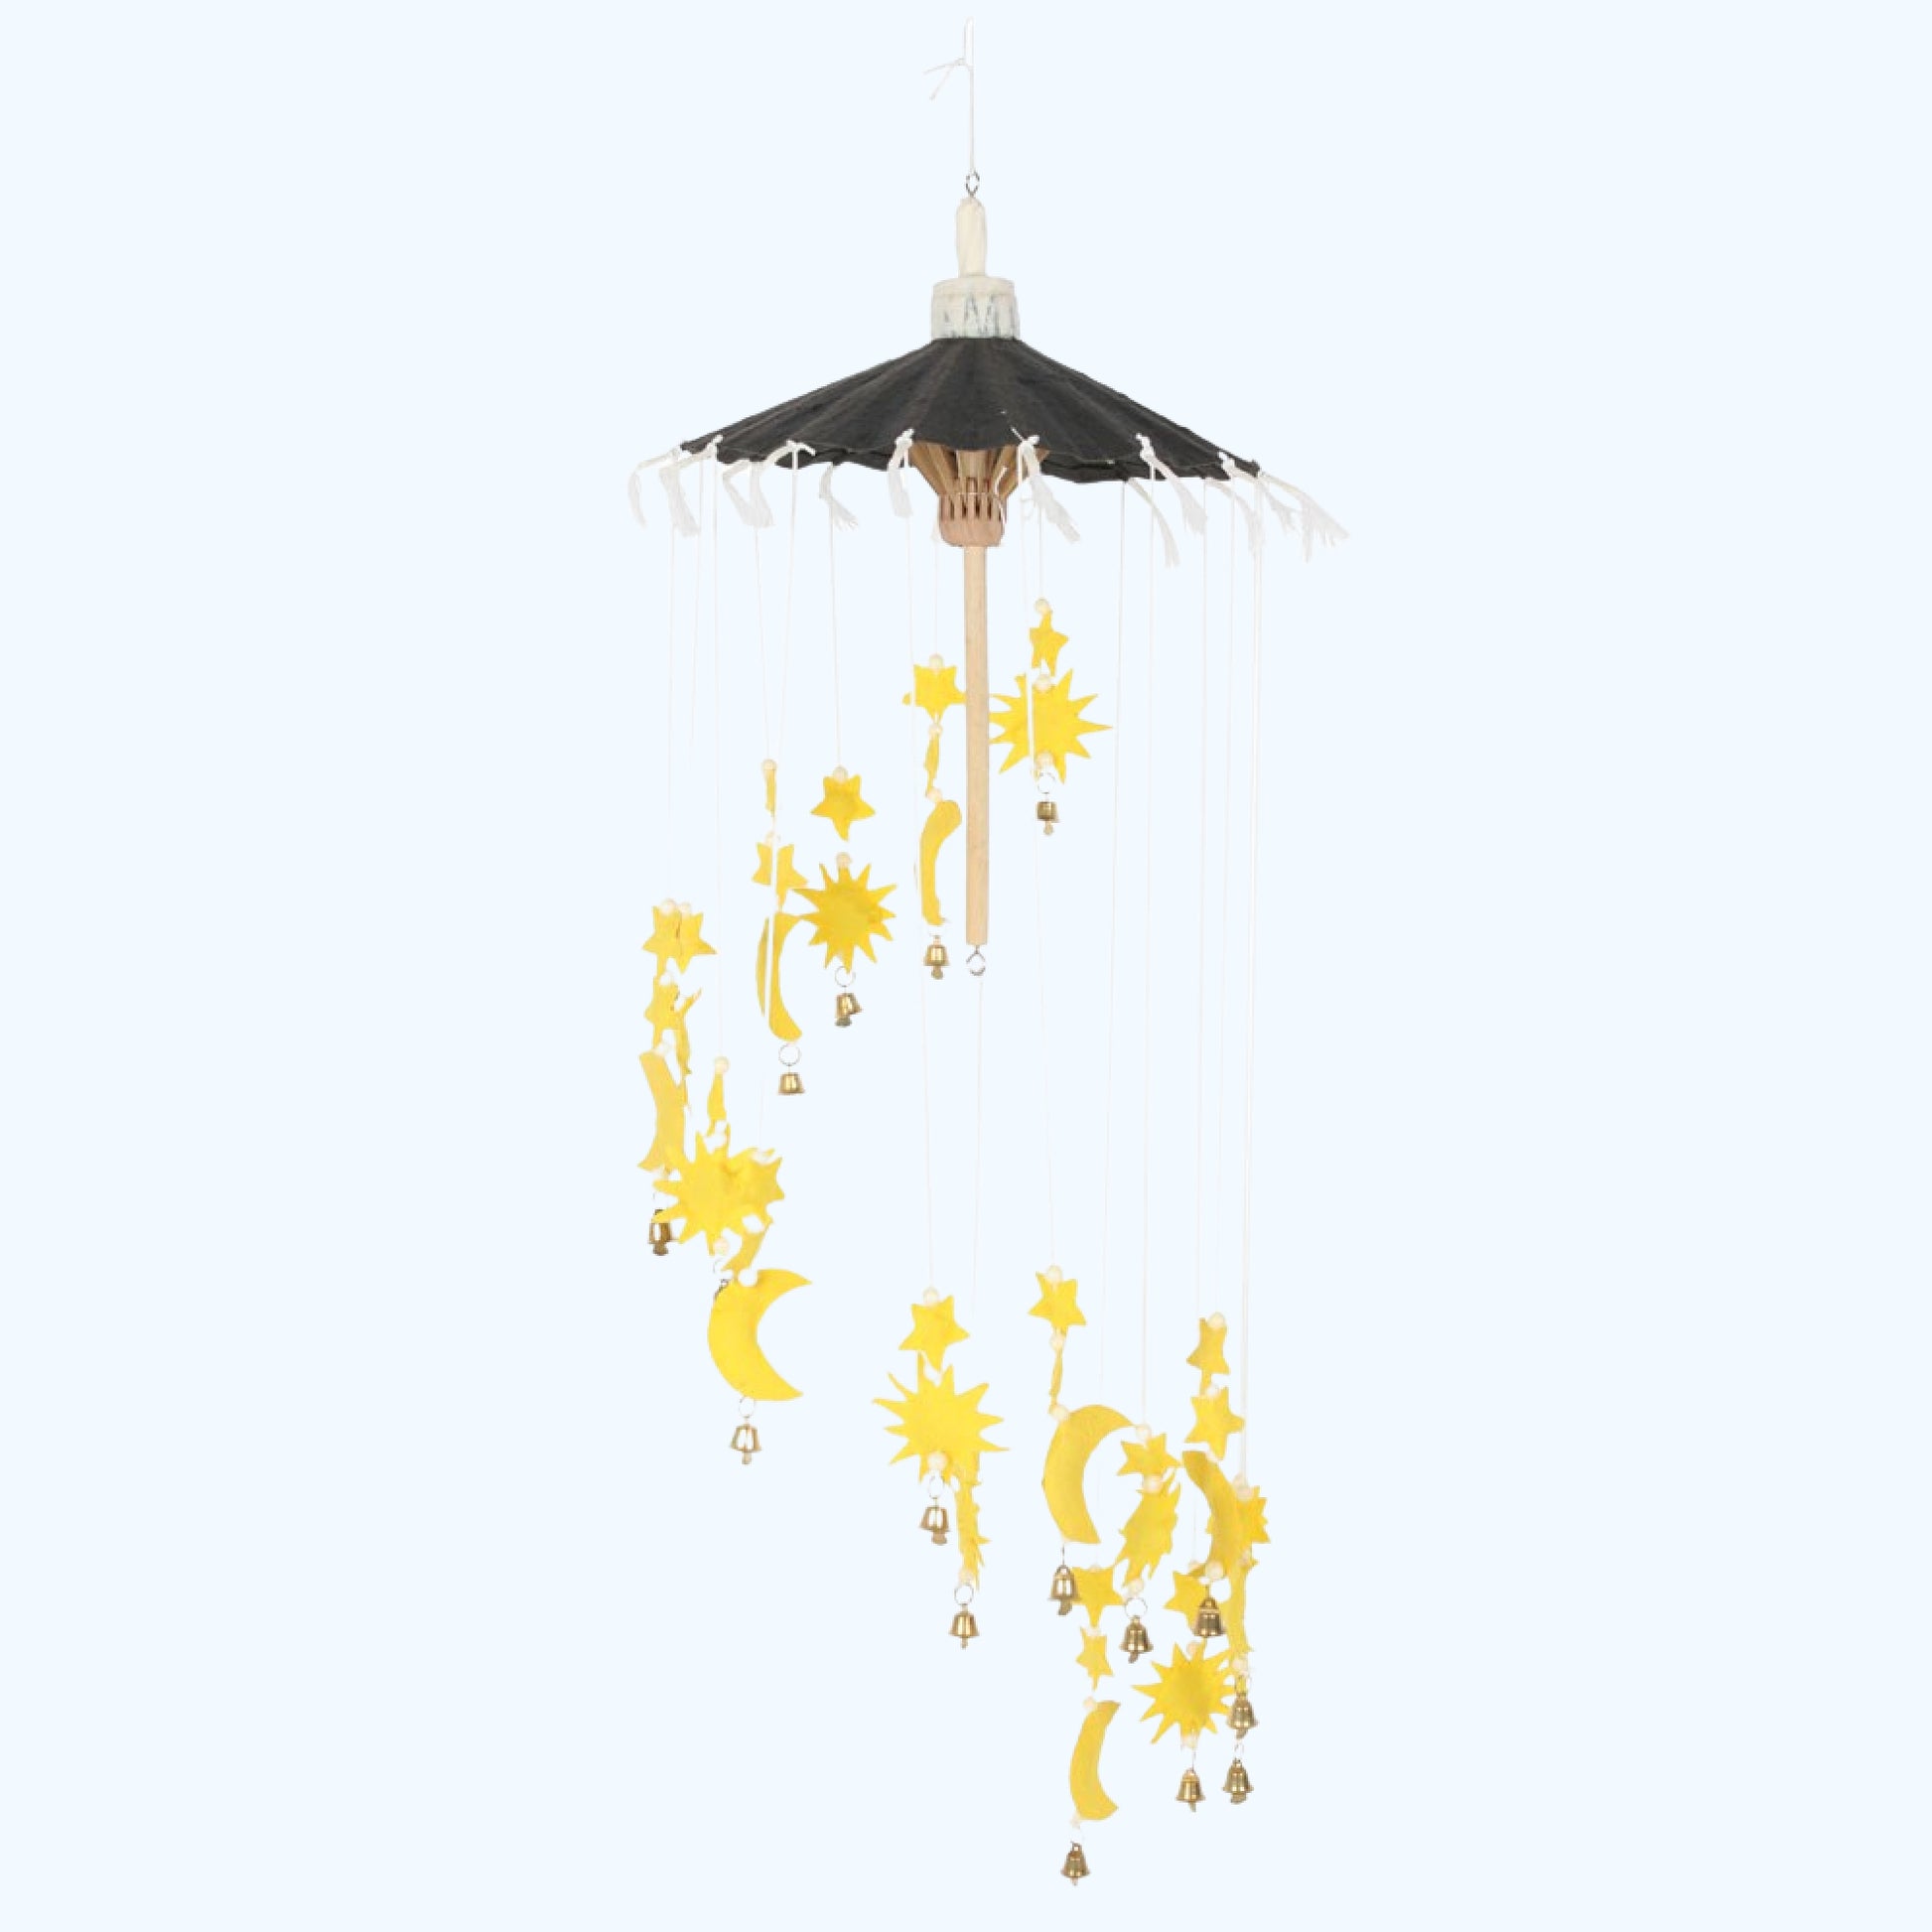 Beautifully crafted and ethically sourced, this Sun, Moon and Stars Mobile with Bells is a unique piece of art.  Its celestial design features sun, stars, and moon in bright yellow with gold bell accents, all created from hand made SAA paper from the bark of mulberry bushes.  A perfect decor piece to add a touch of magic to any living space.